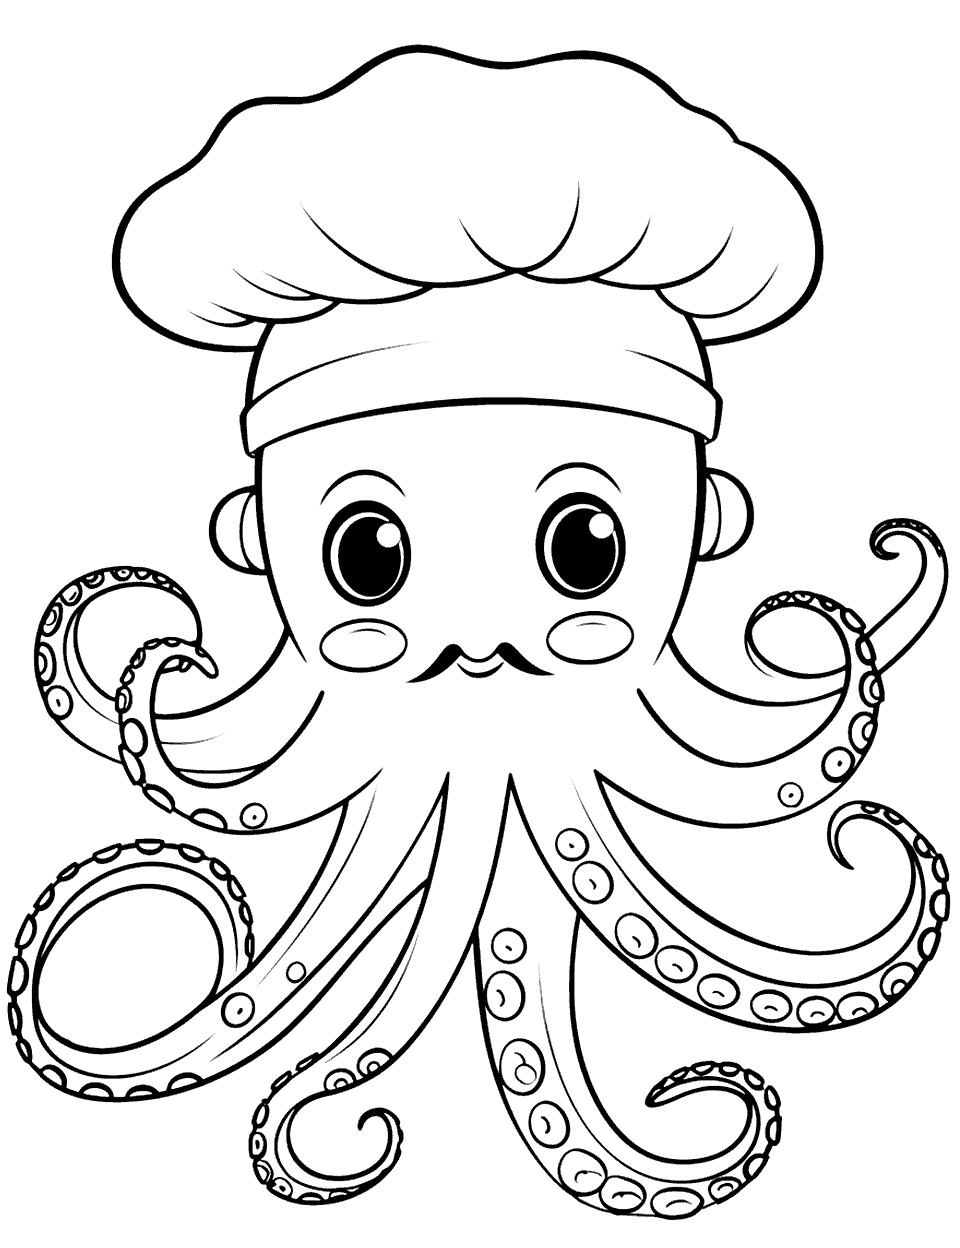 Octopus Chef Coloring Page - An octopus wearing a chef’s hat.